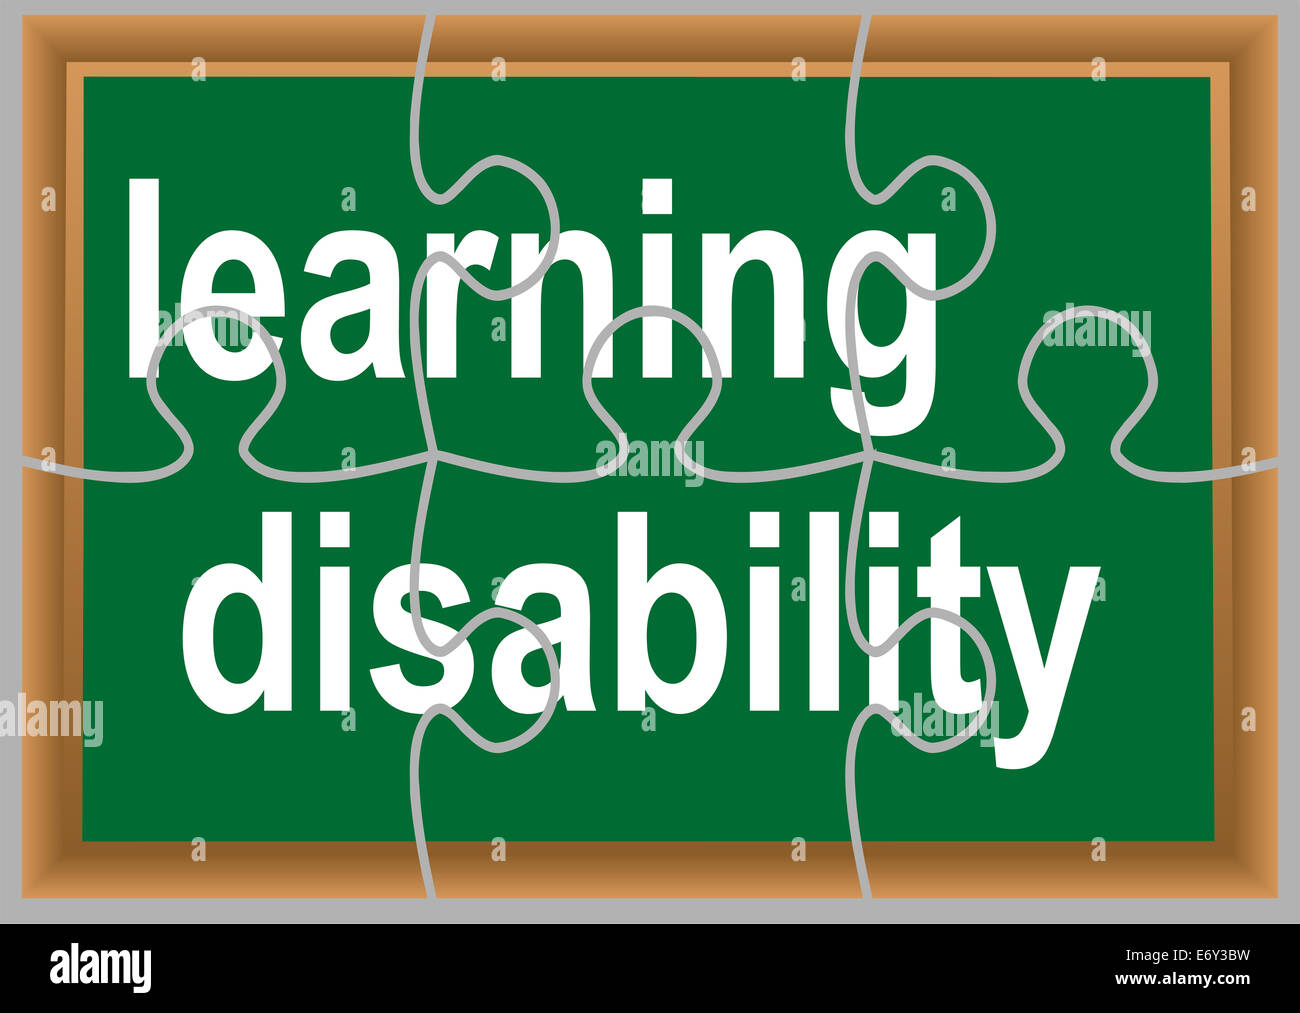 learning disability Stock Photo